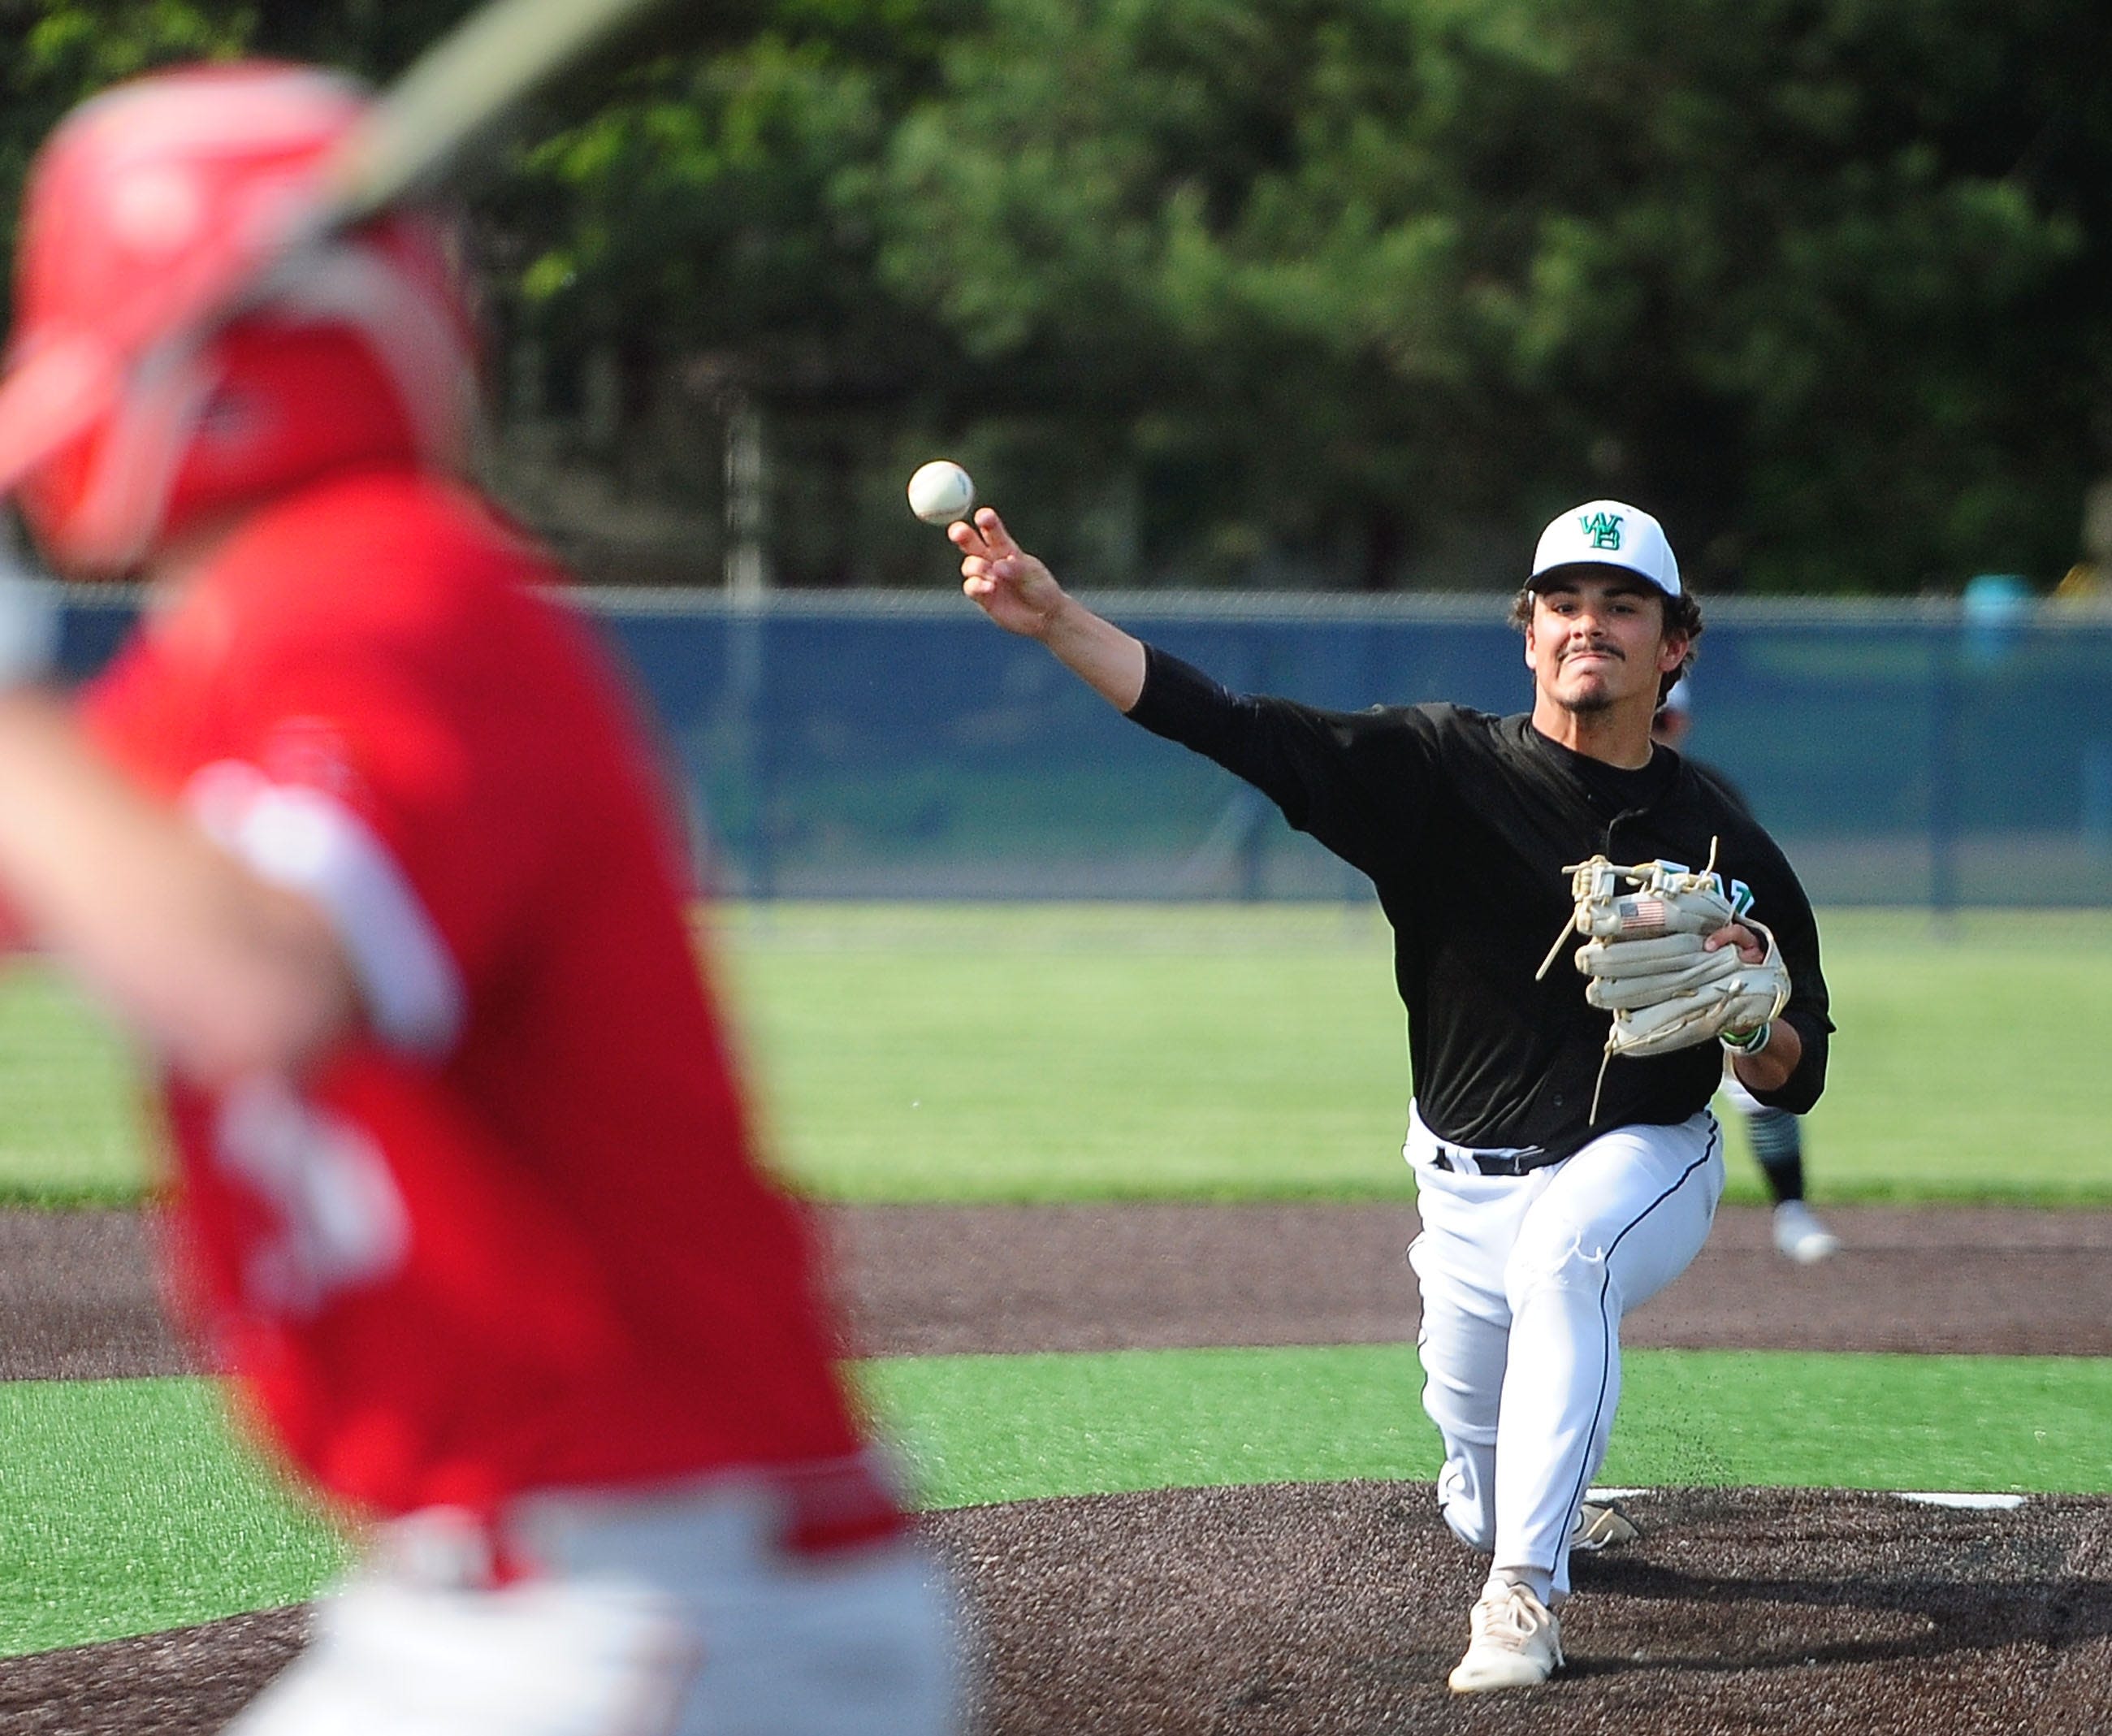 Anthony Perry helps lead West Branch High School baseball to OHSAA district championship